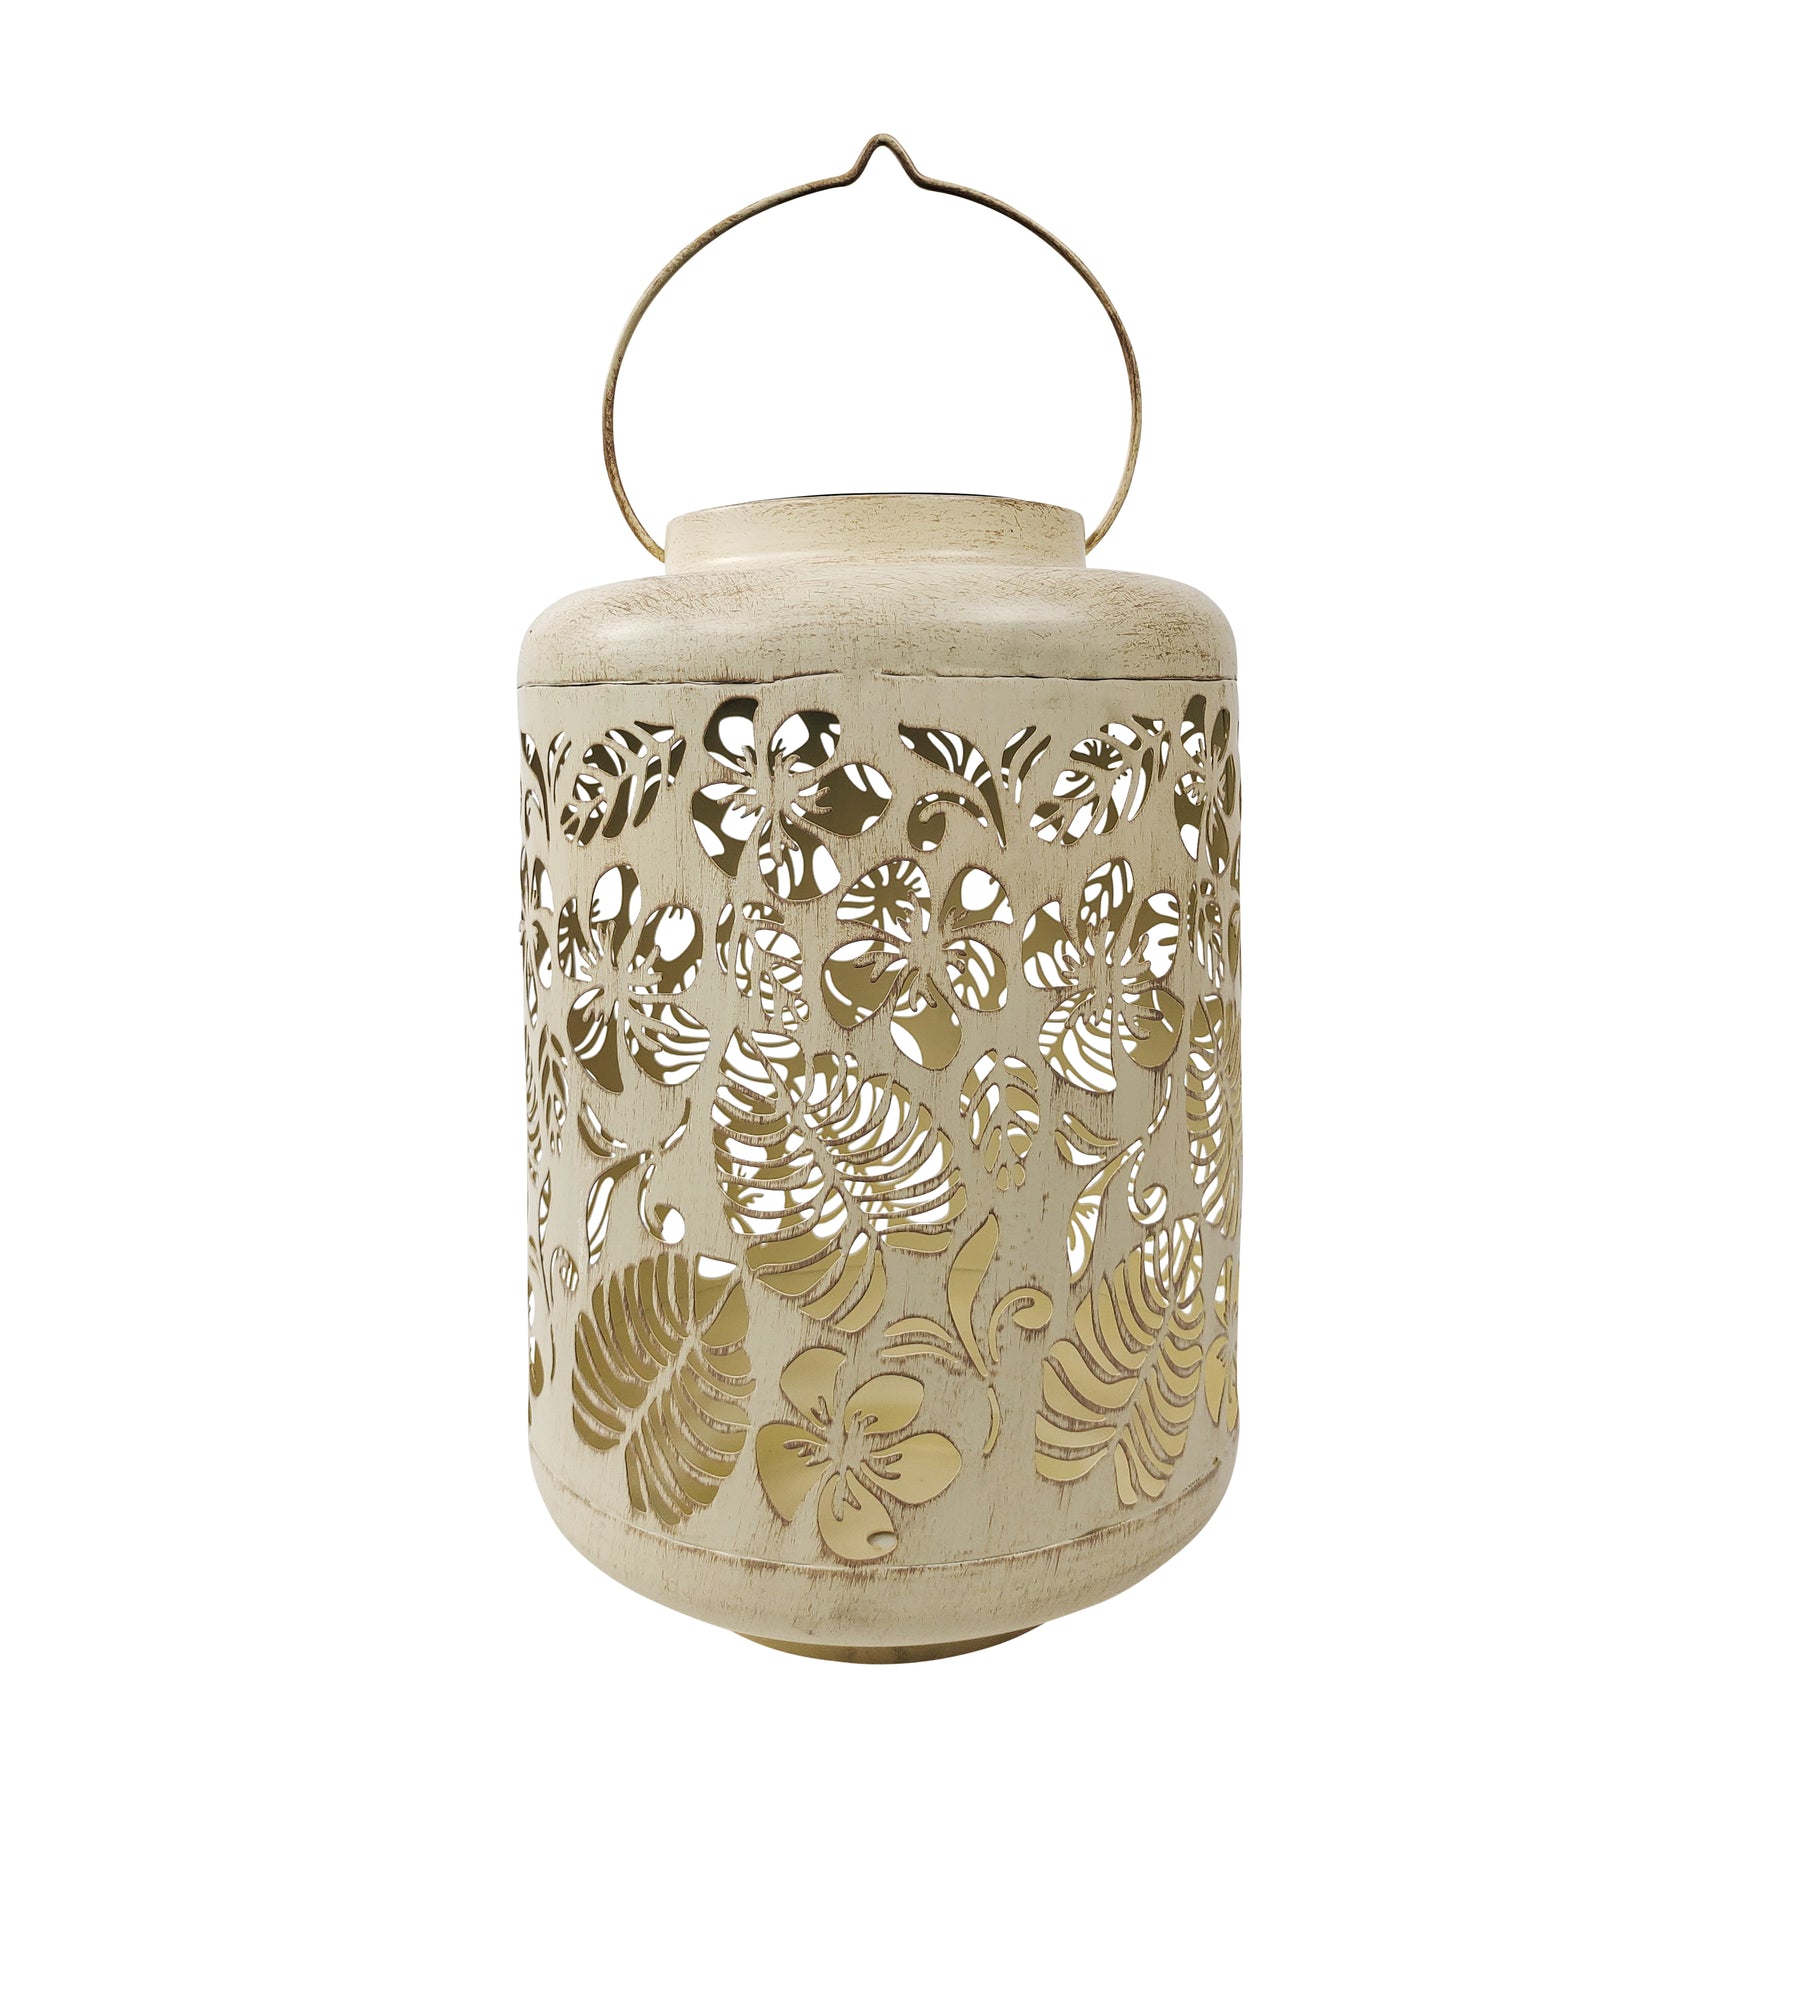 Bliss Outdoors 12-inch Tall Hanging and Tabletop Decorative Solar LED Lantern with Unique Tropical Flower Design and Antique Hand Painted Finish in the antique white variation.